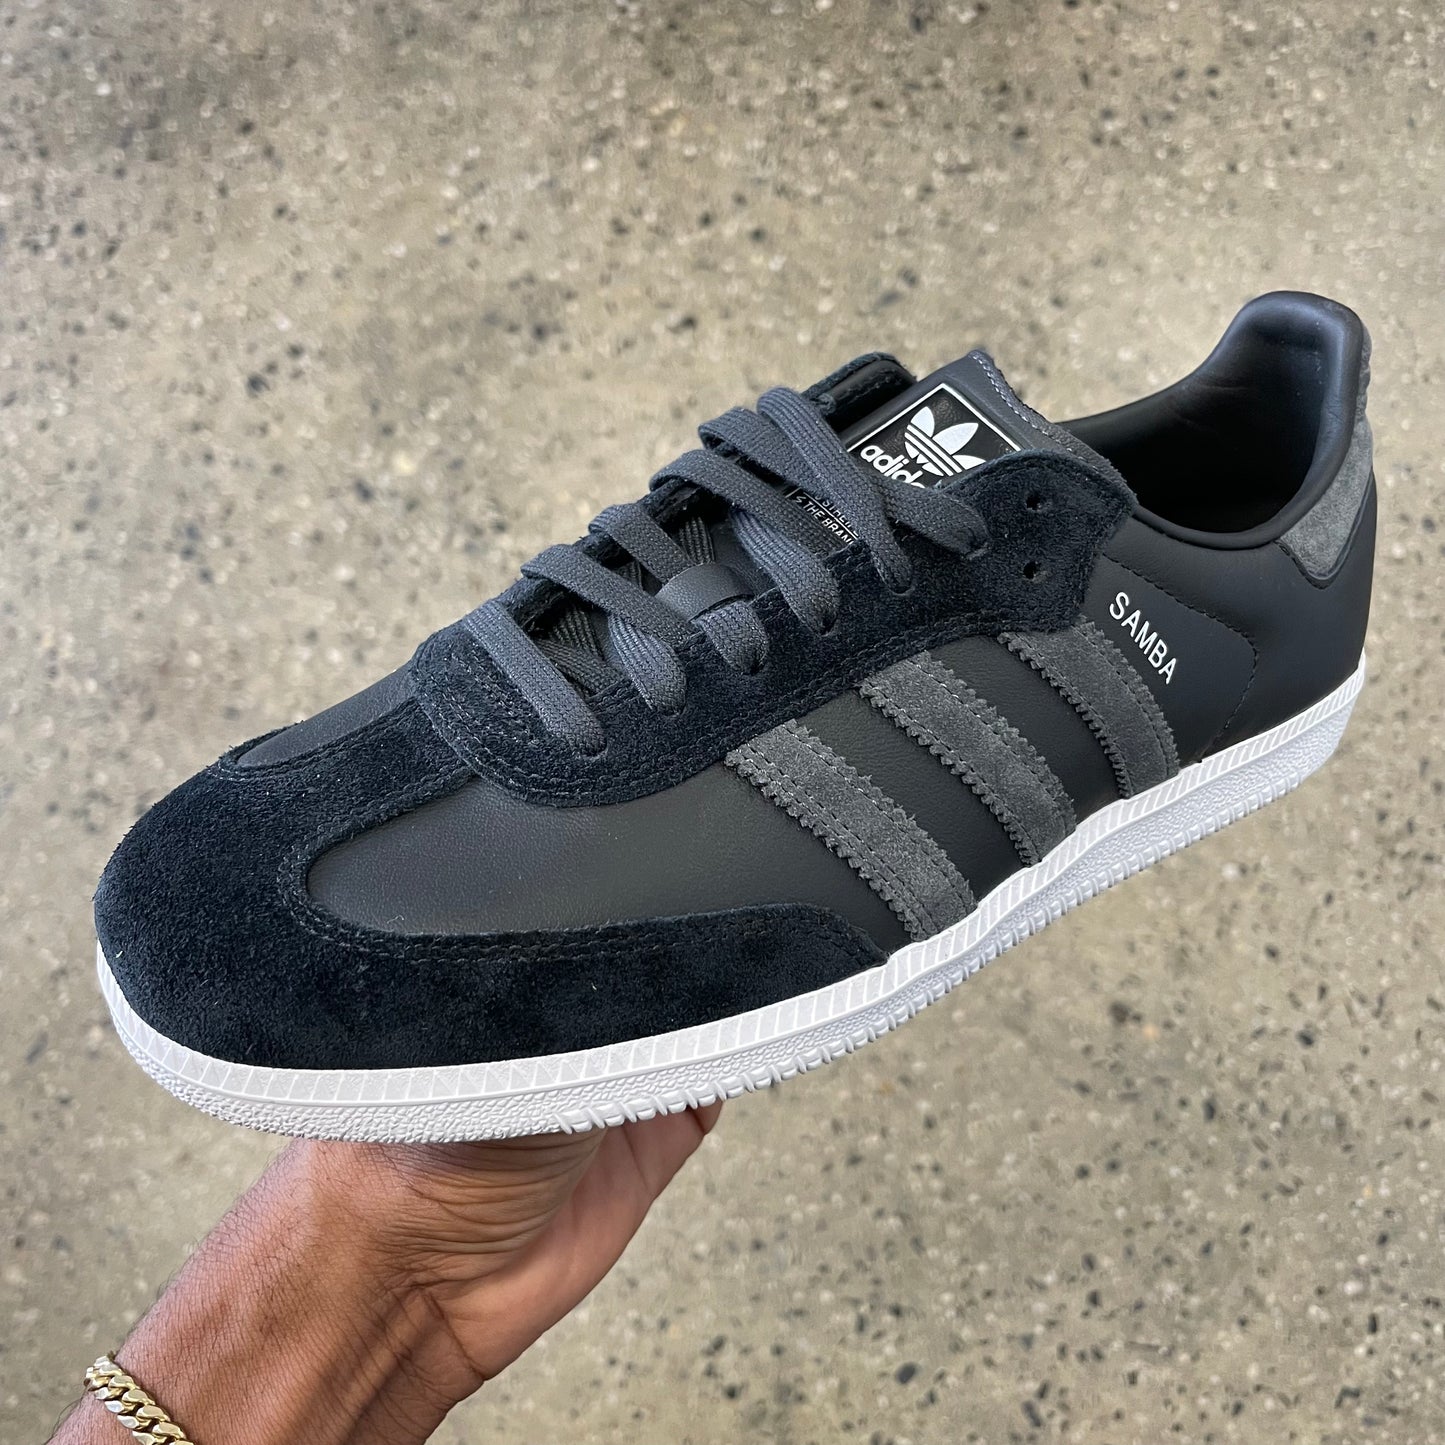 black leather and suede sneaker with grey stripes and white sole, side view